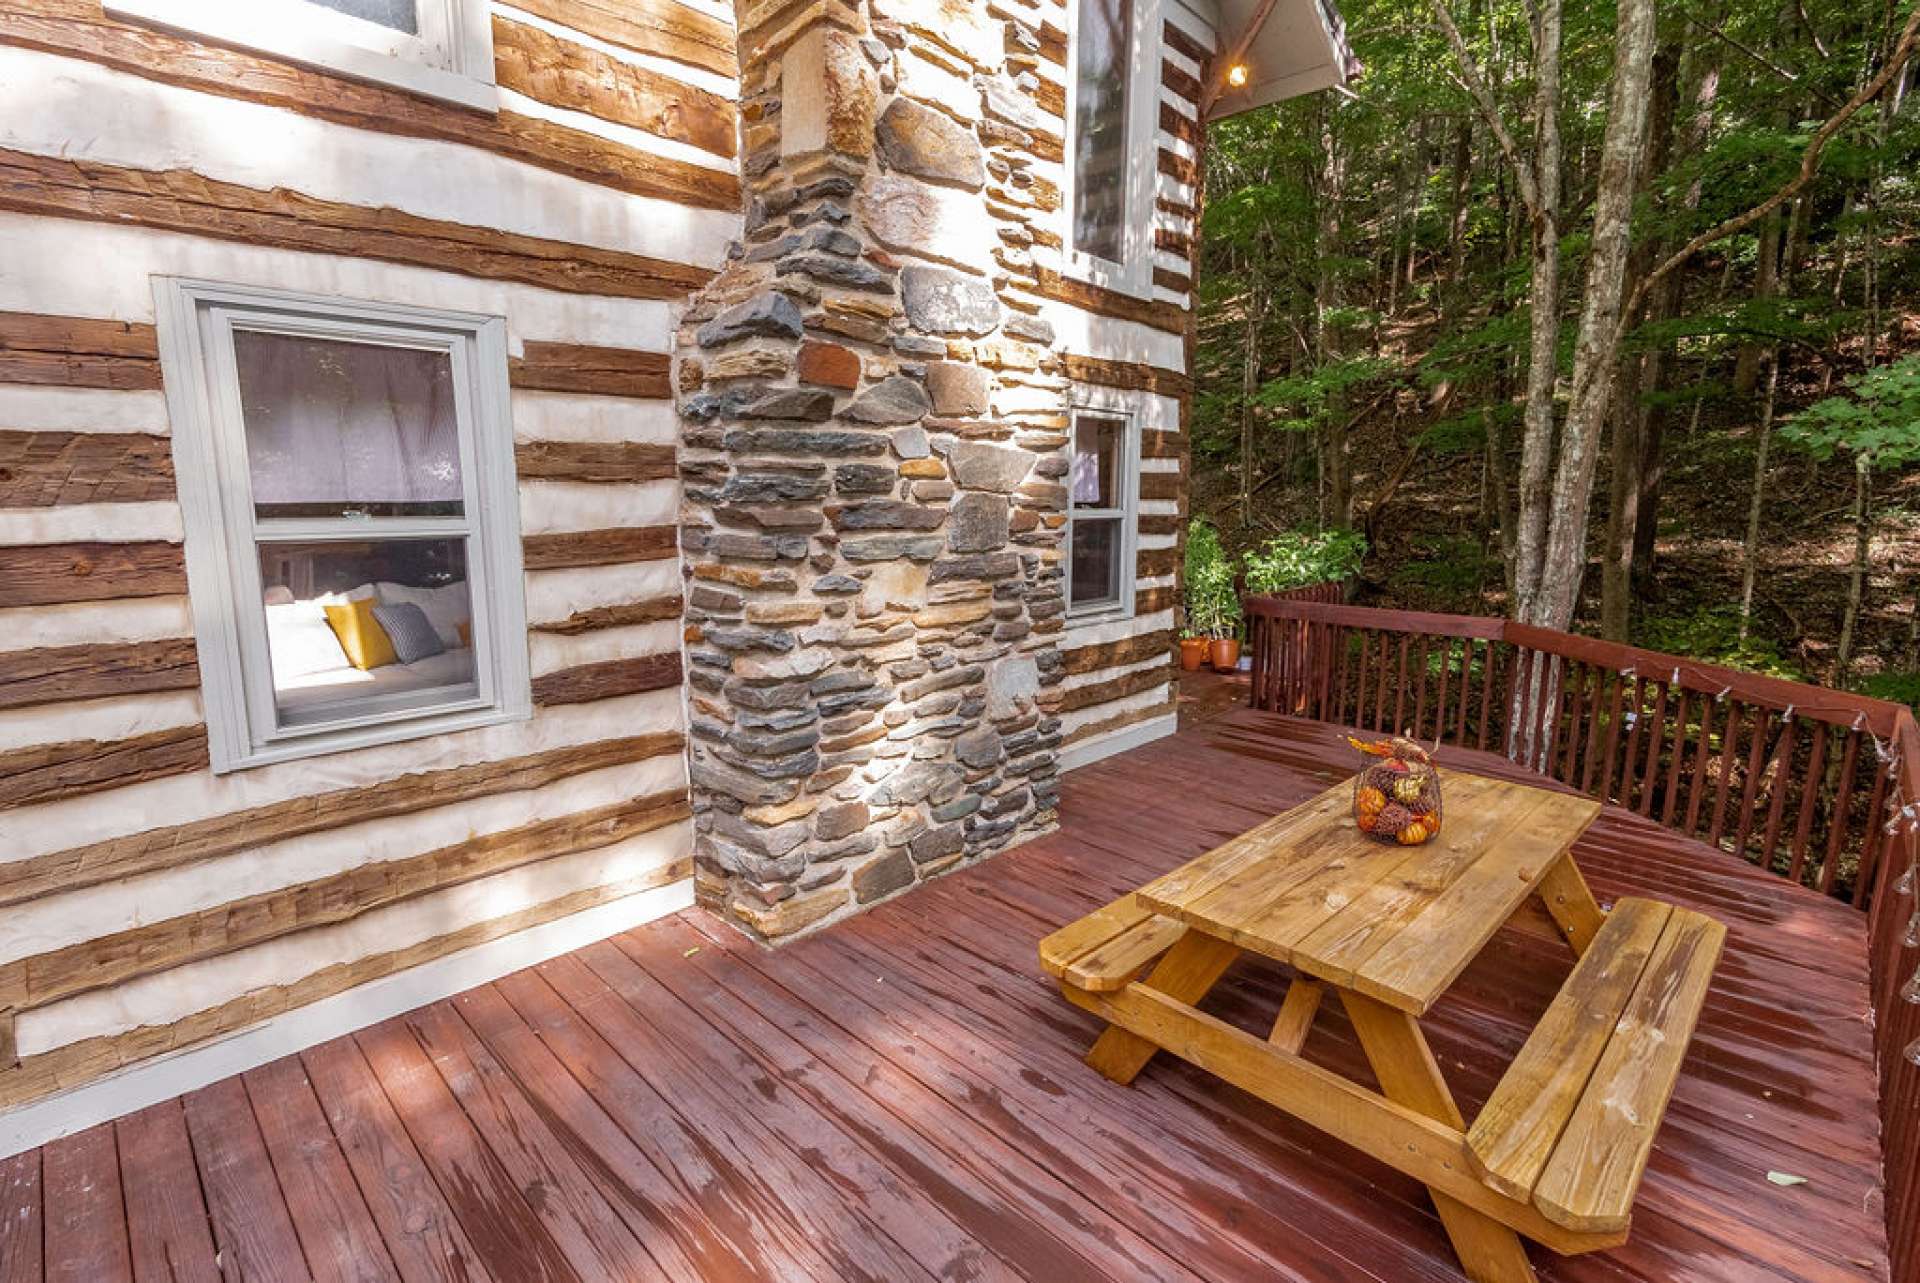 The outdoor wrap around deck space is great for entertaining and enjoying the fresh mountain air.